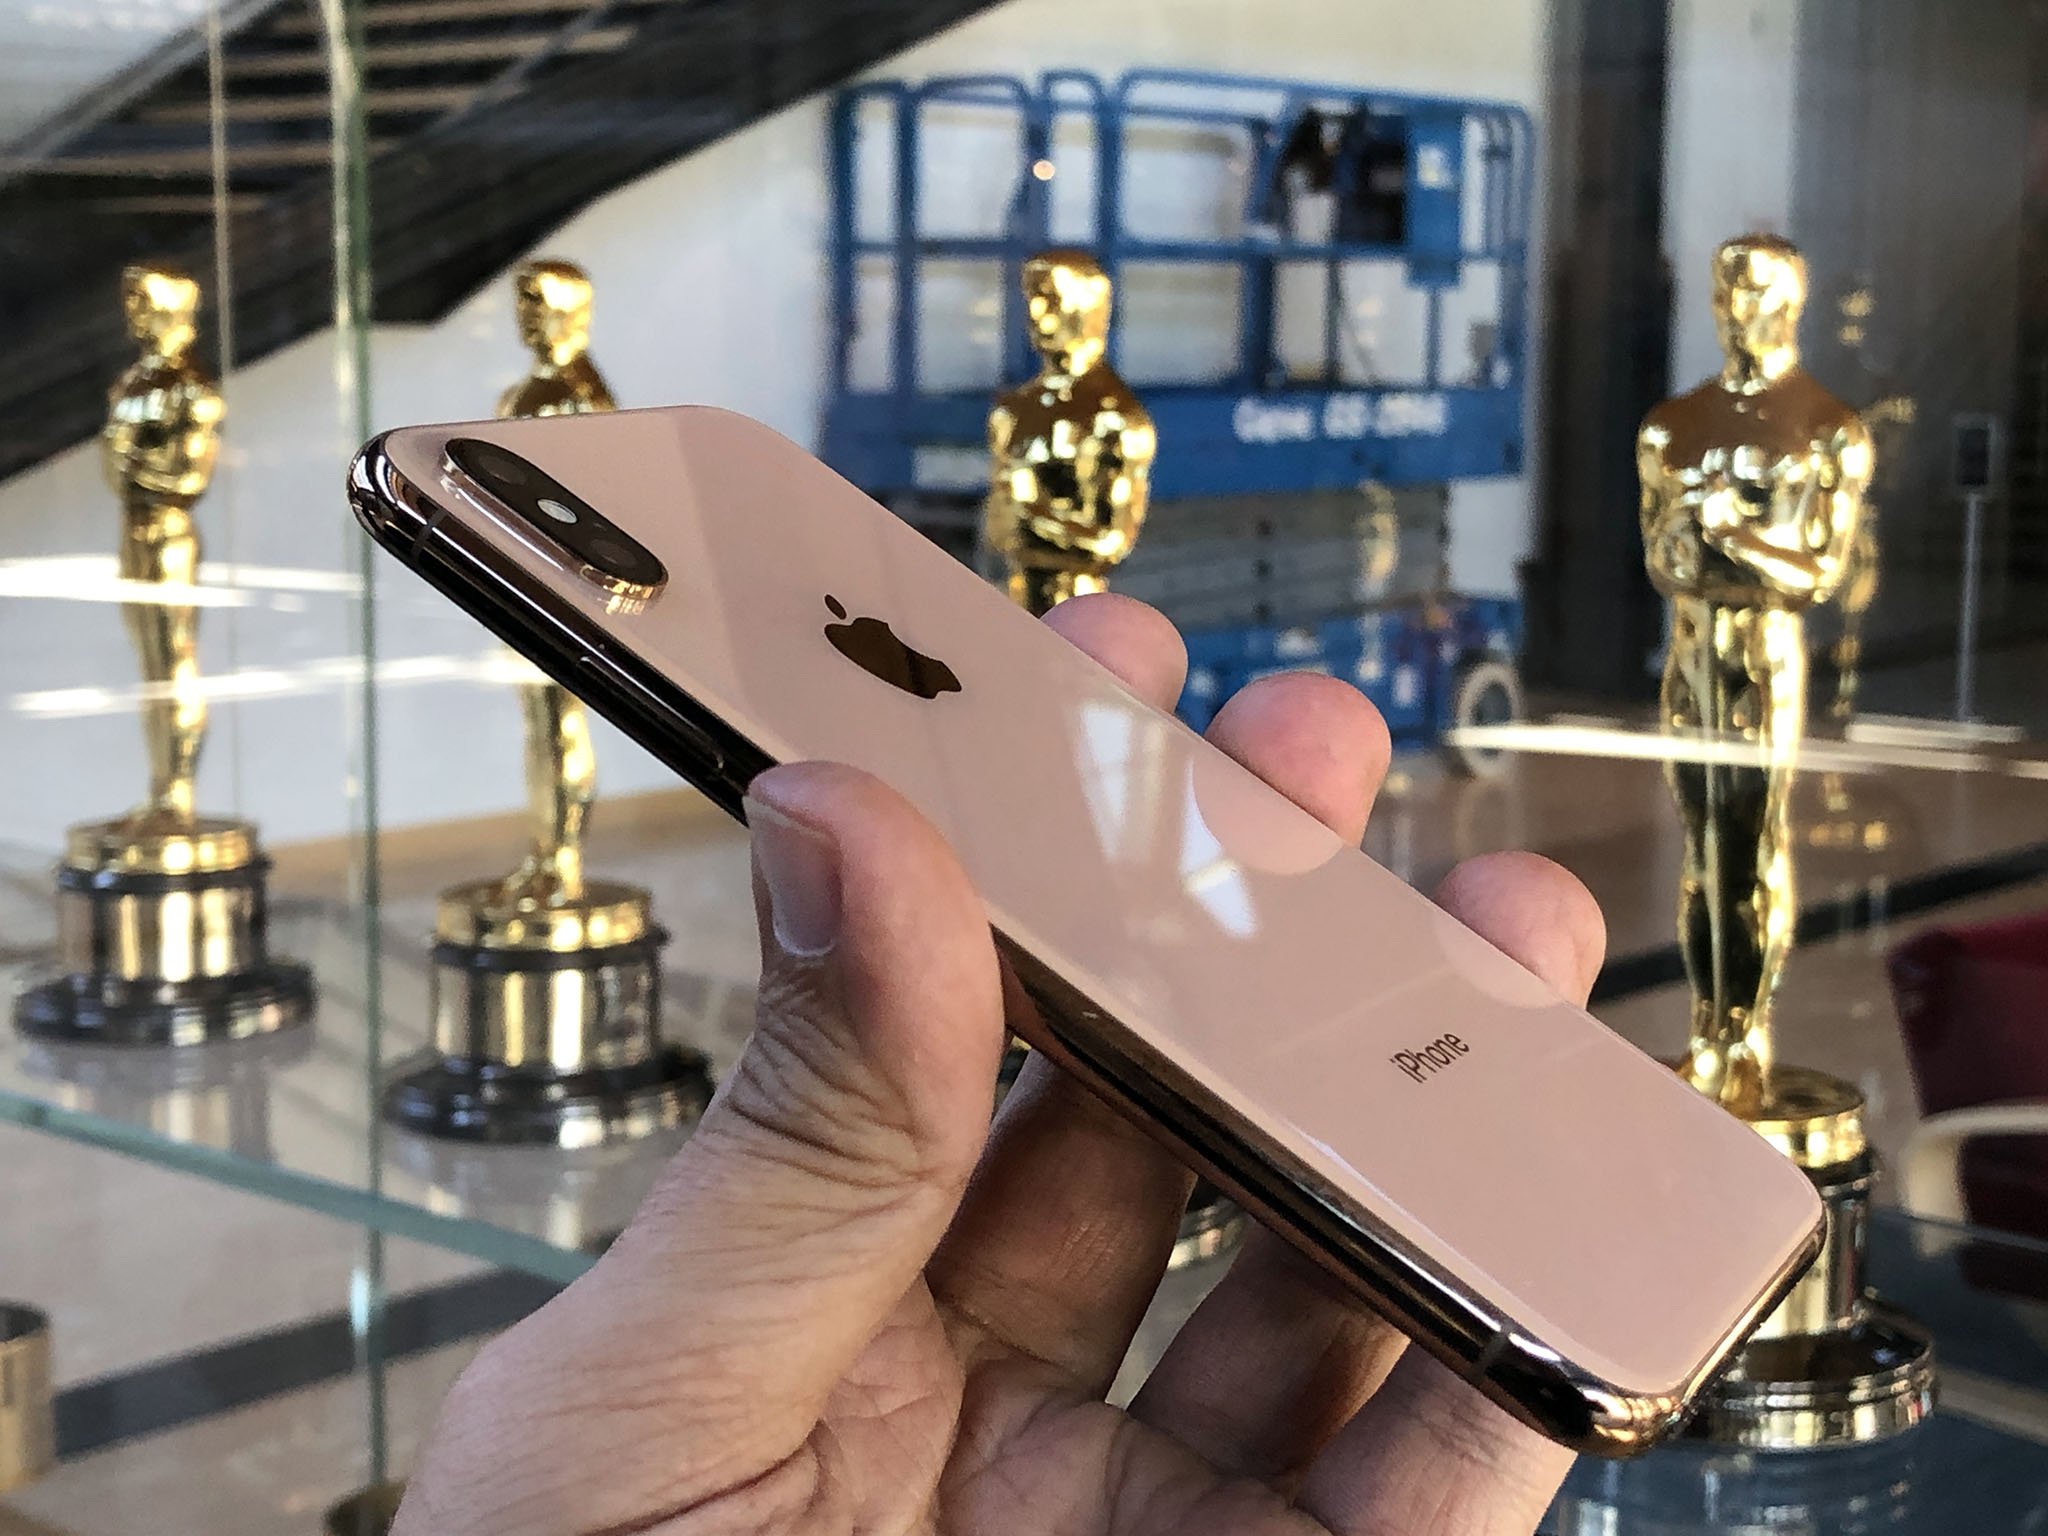 Iphone Xs And Max Review Bigger, Landscape View Iphone Xs Max